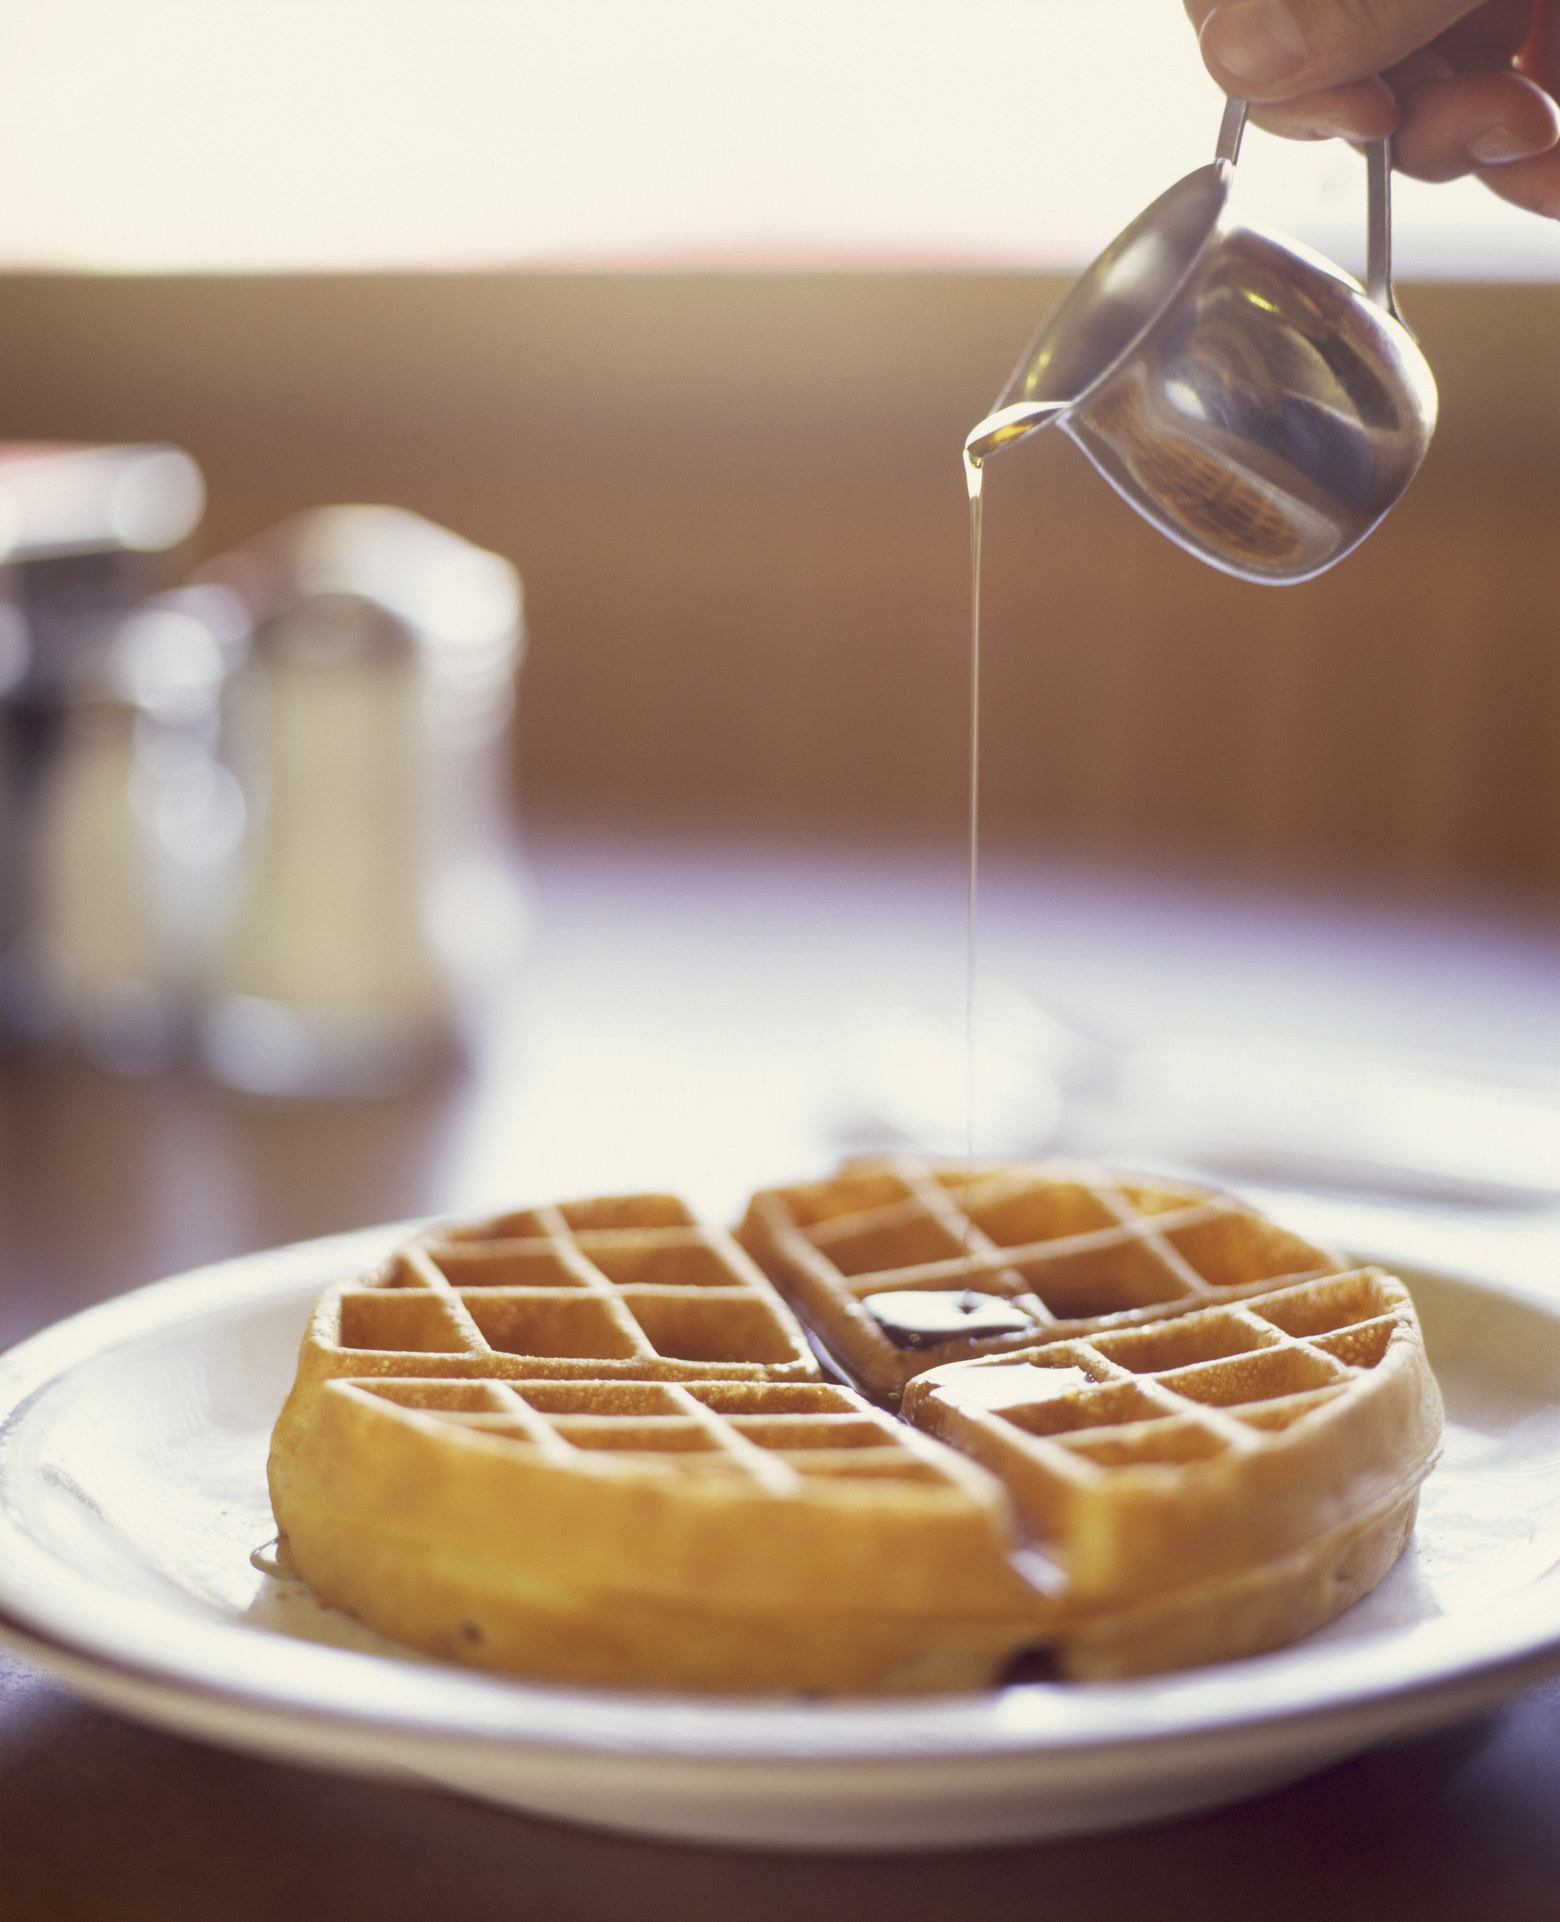 Pouring syrup on waffle.